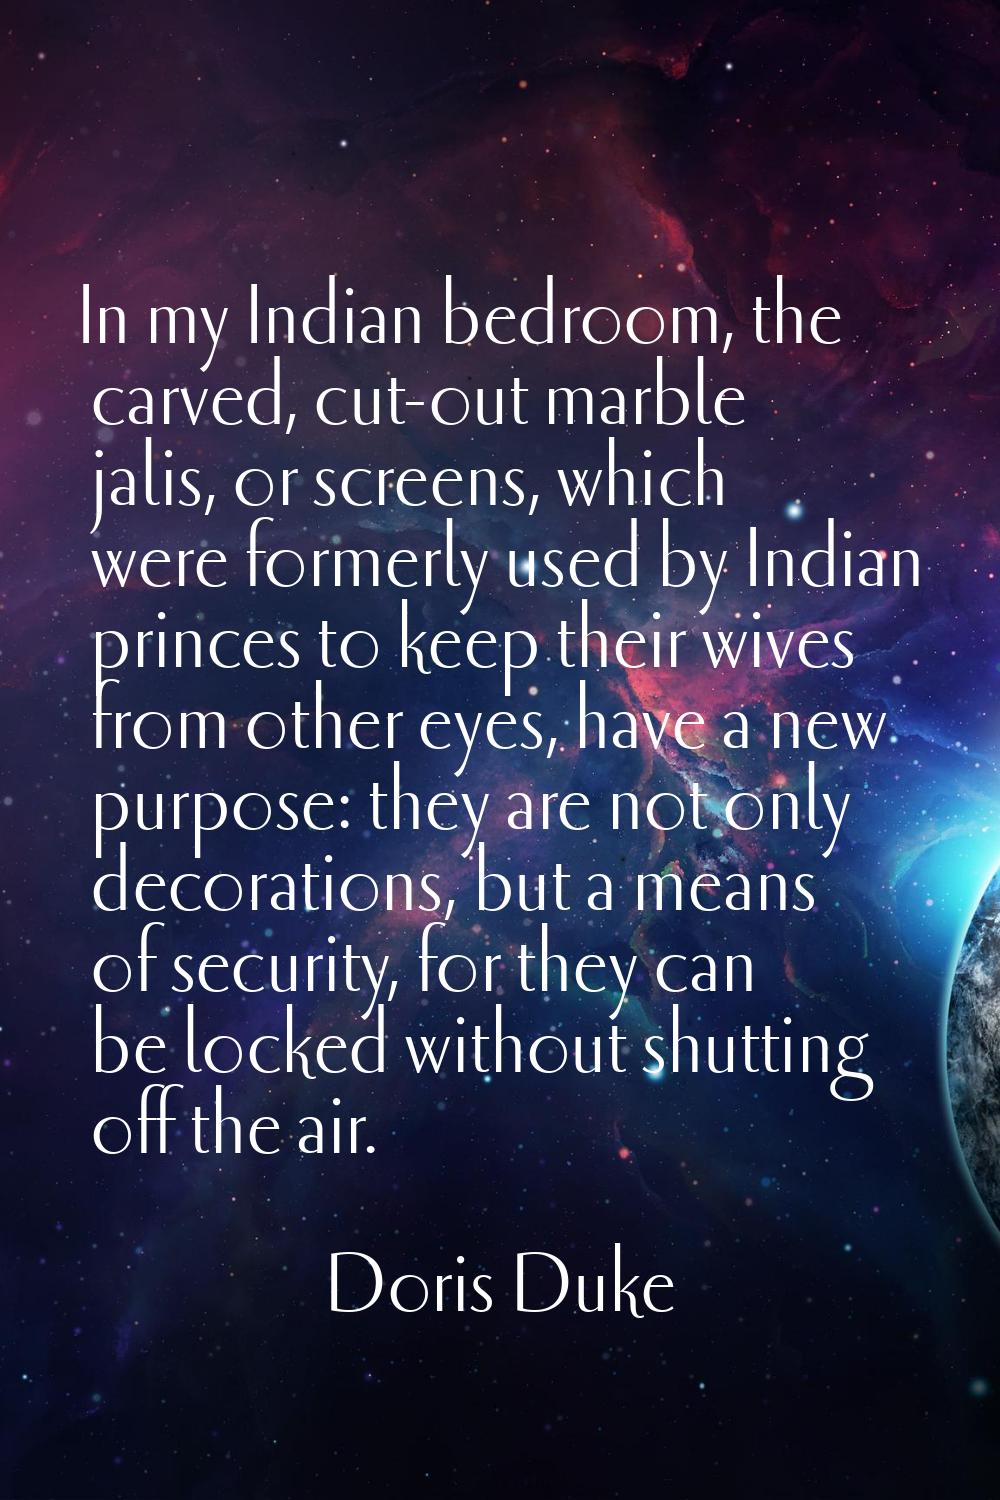 In my Indian bedroom, the carved, cut-out marble jalis, or screens, which were formerly used by Ind